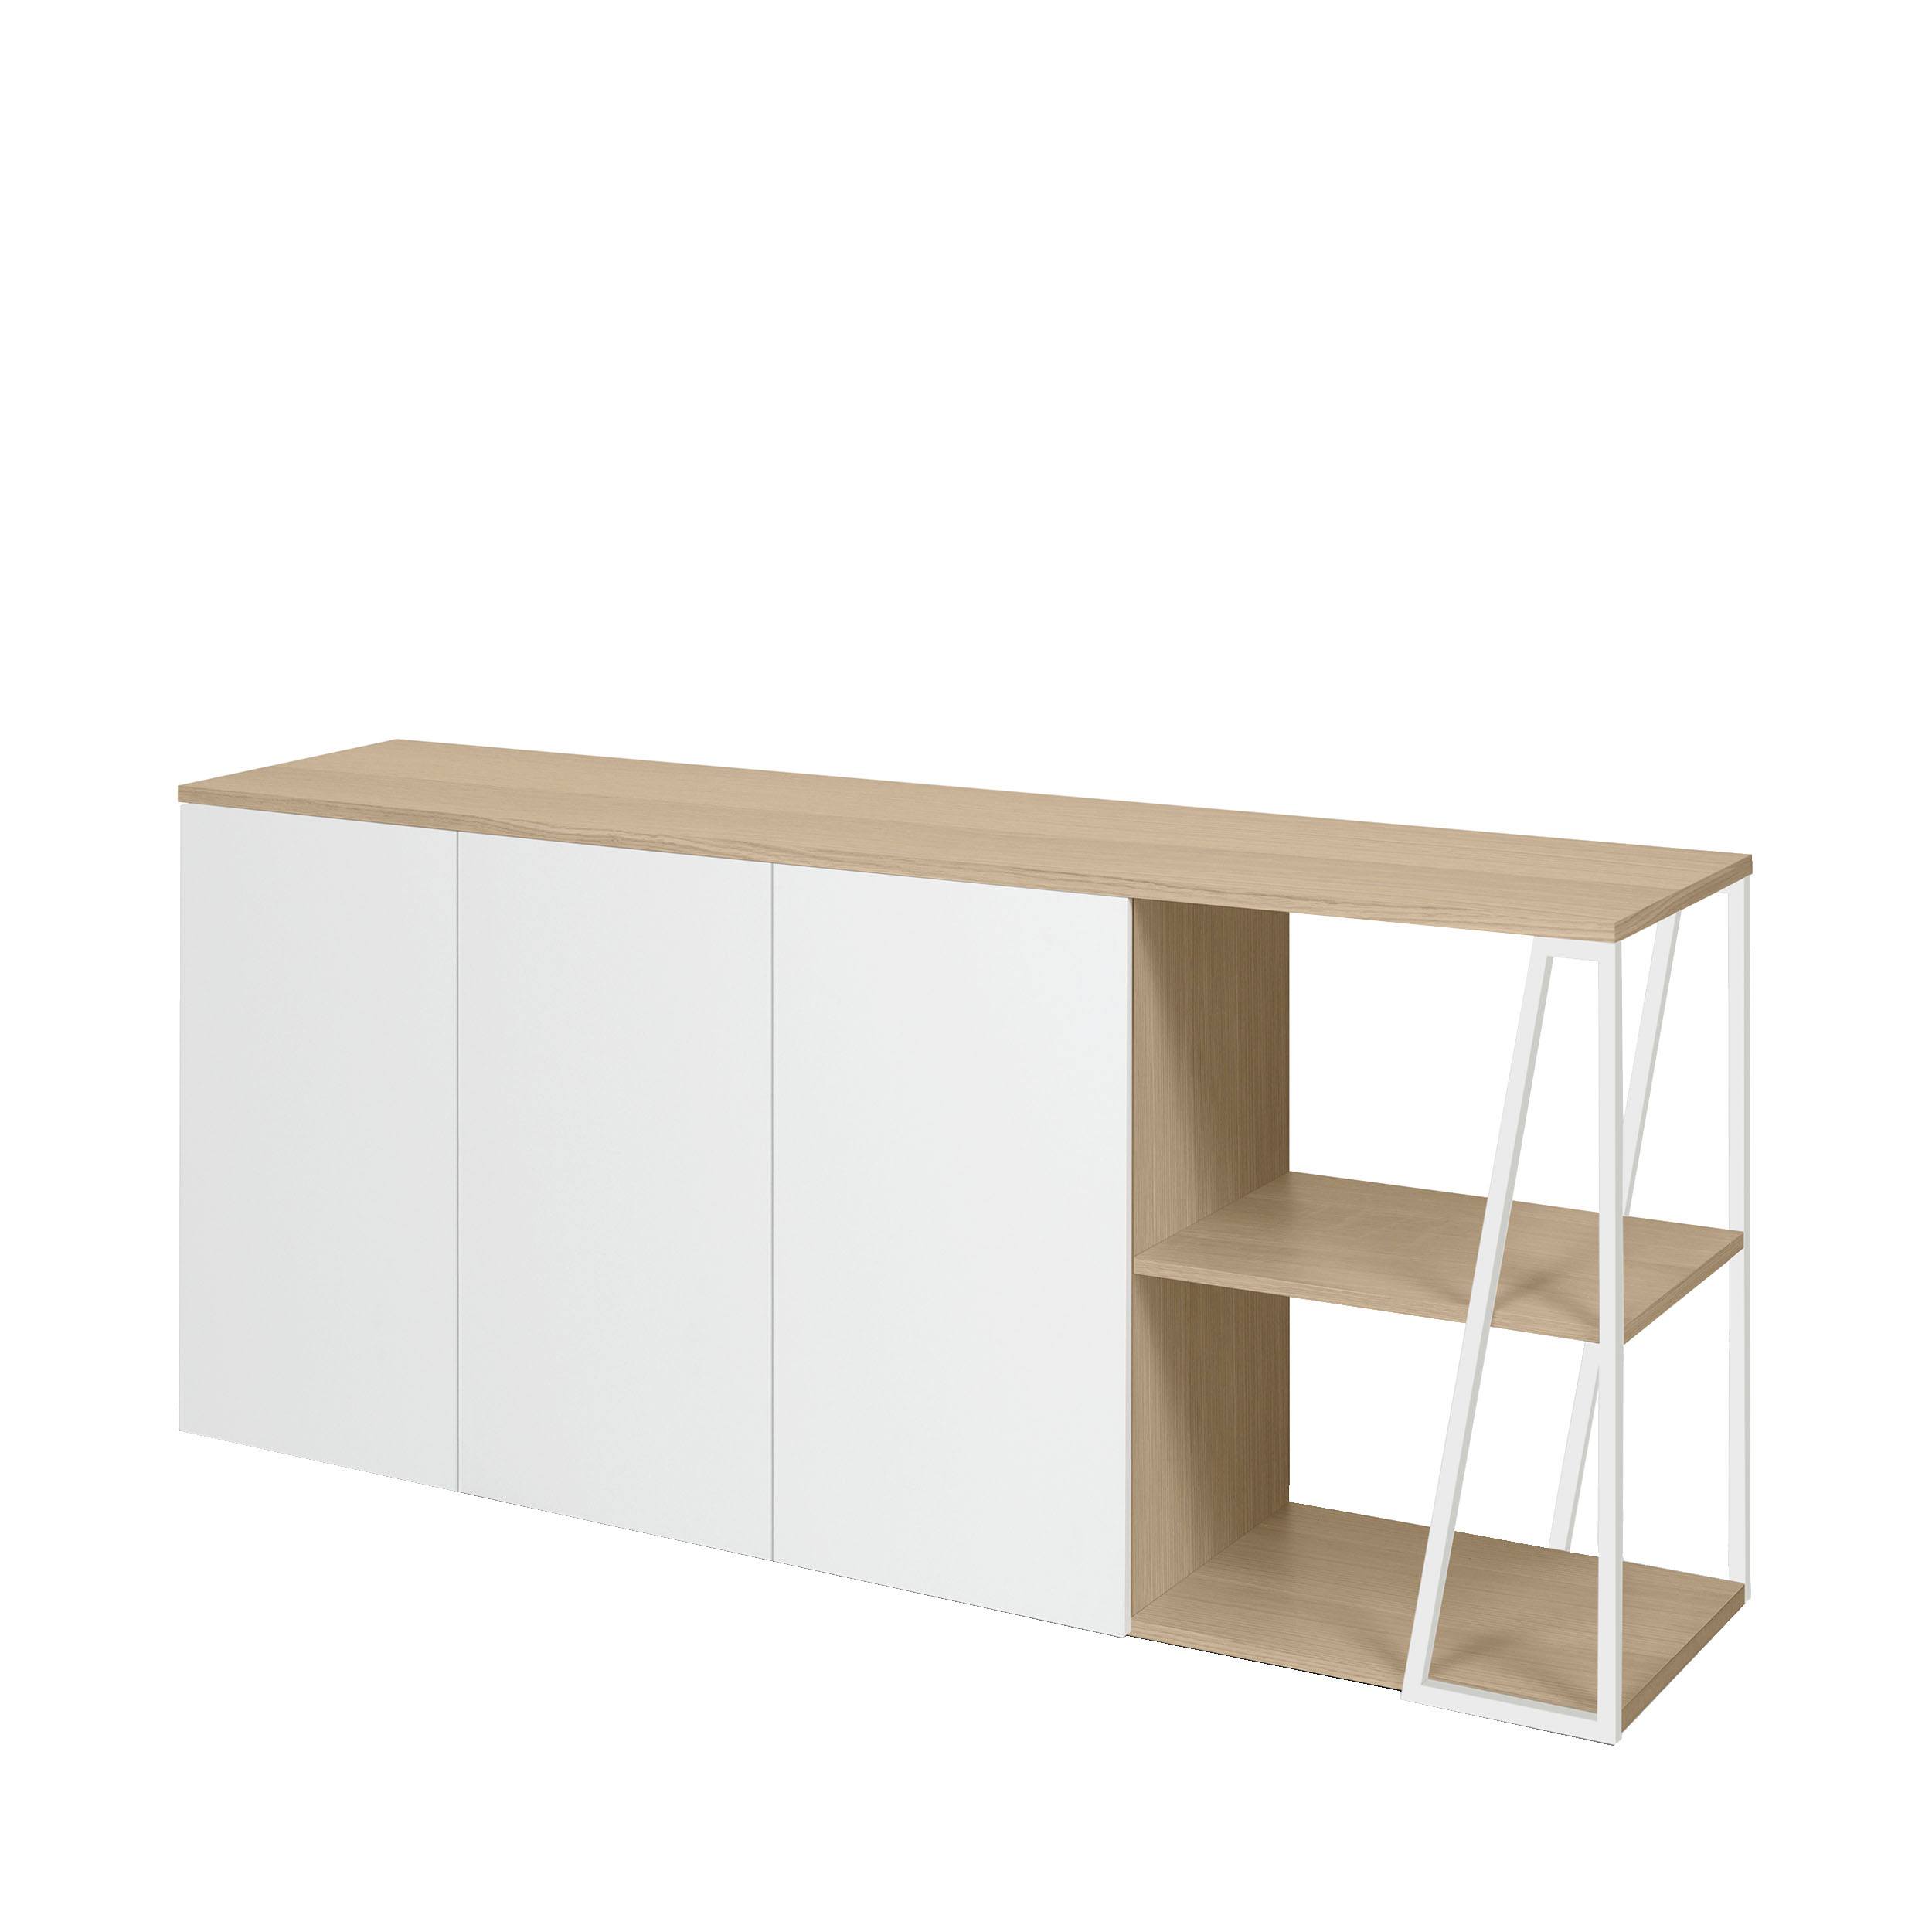 Temahome Albi Sideboard  weiss